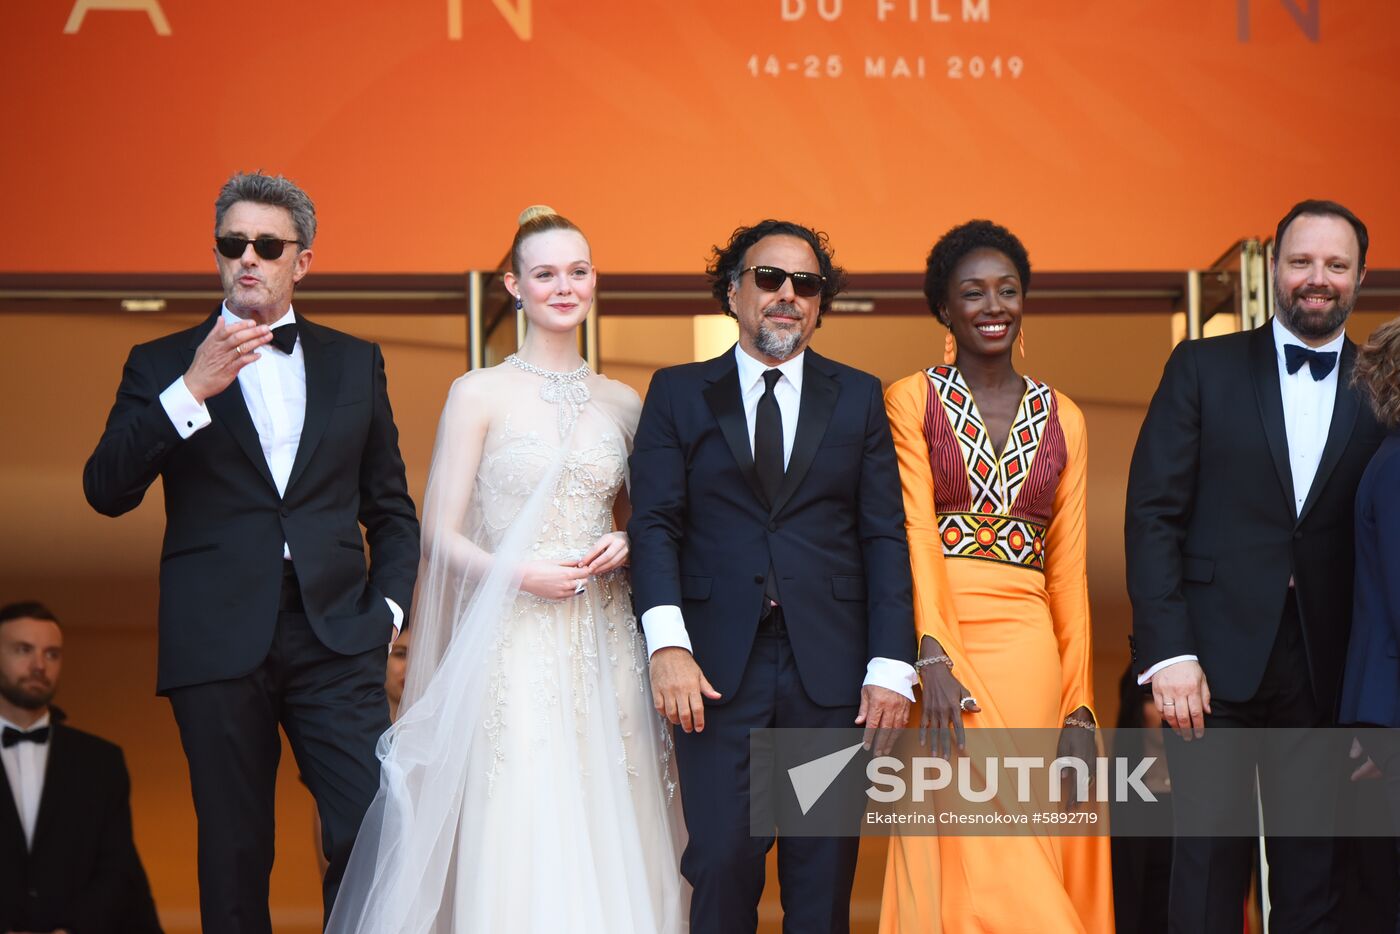 France Cannes Film Festival Closing Ceremony